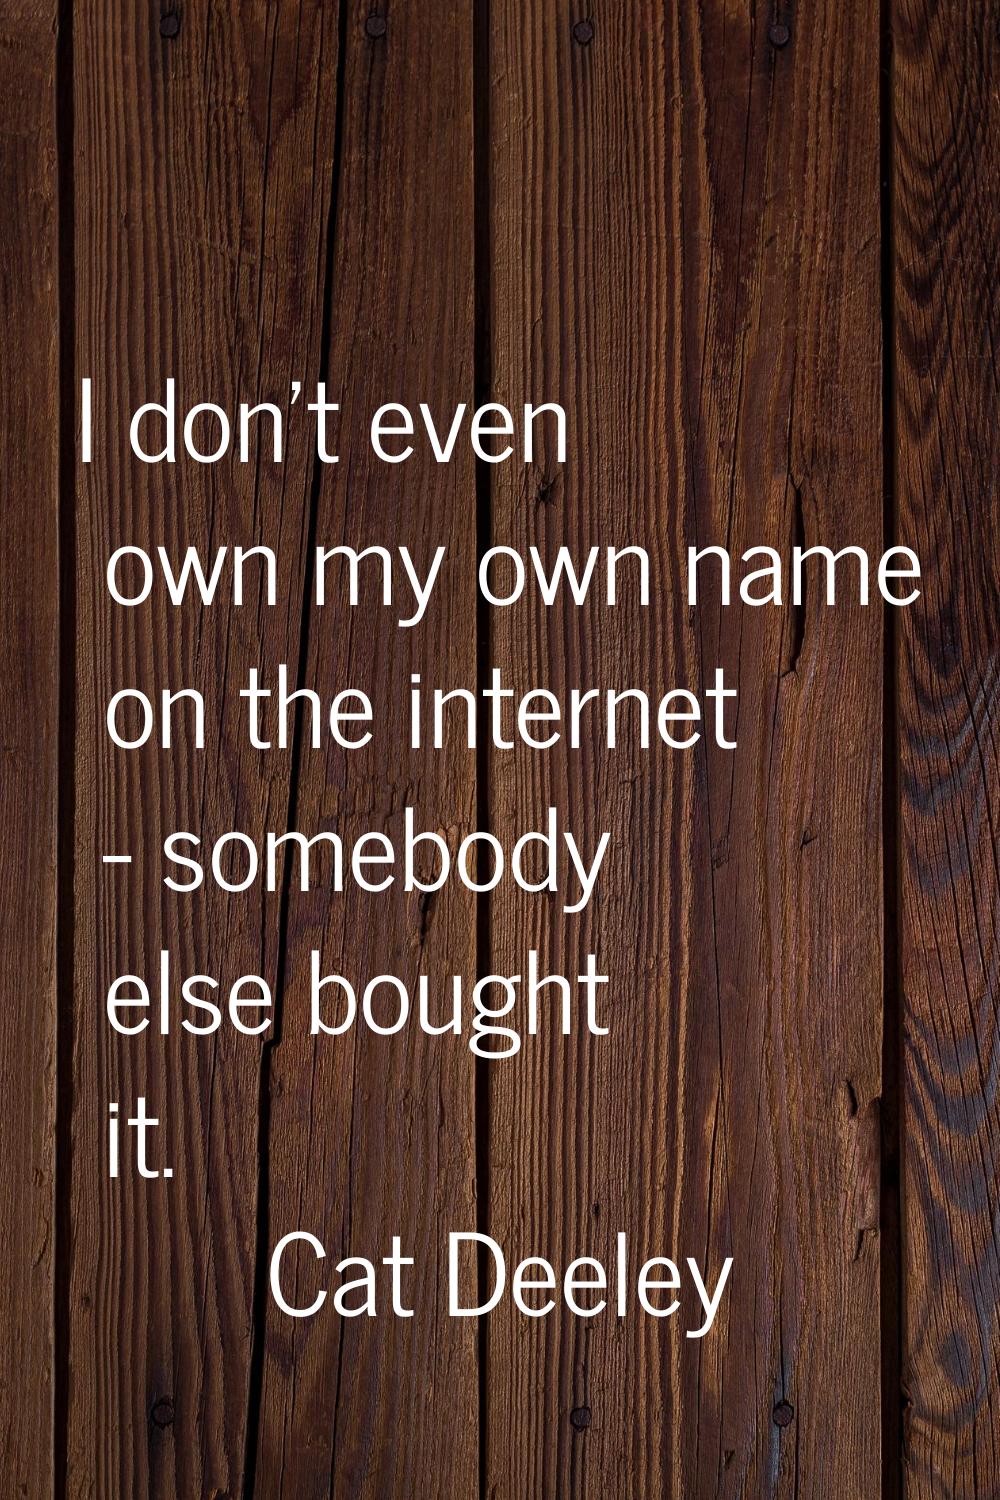 I don't even own my own name on the internet - somebody else bought it.